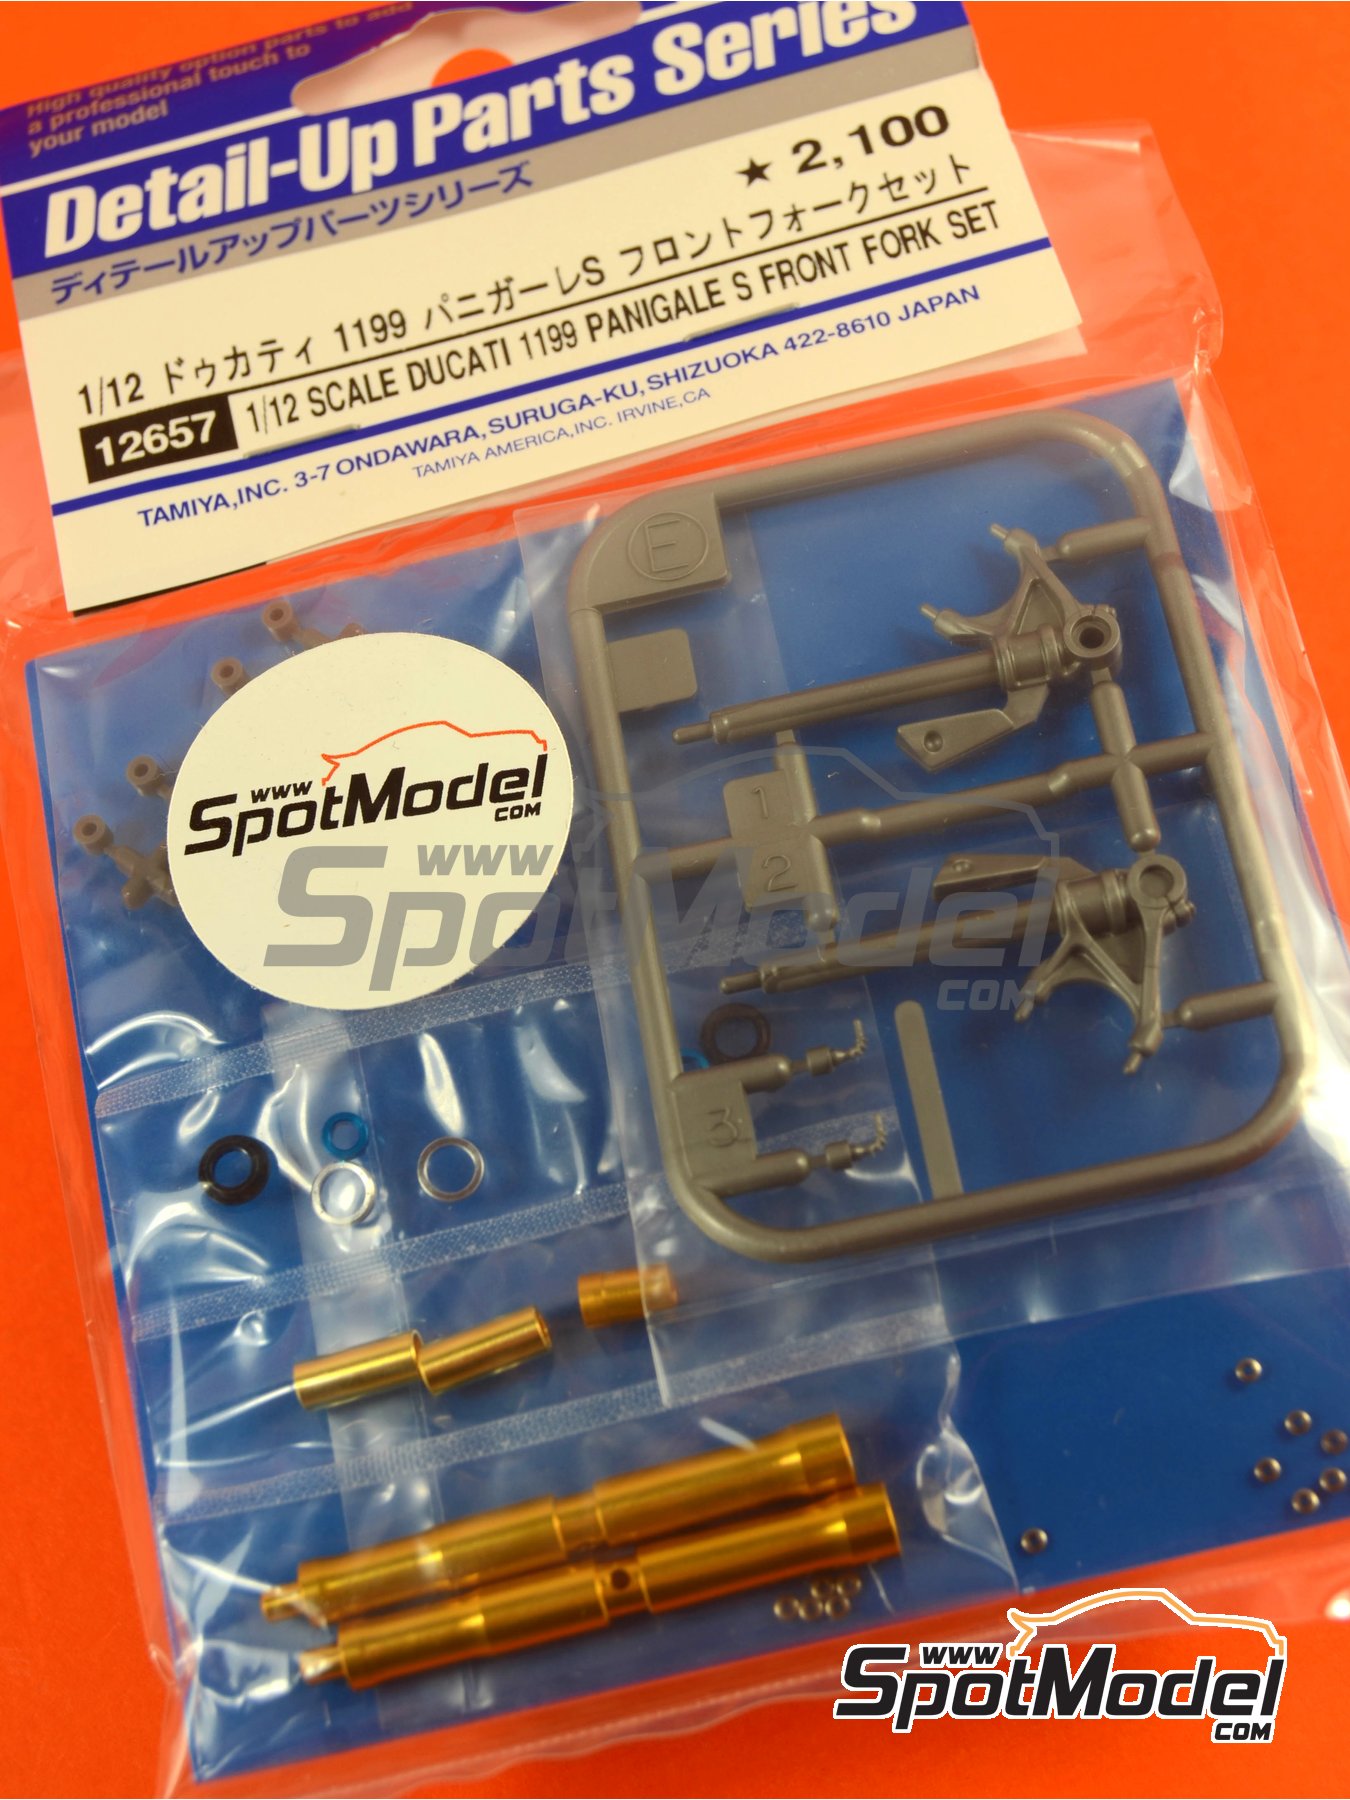 Tamiya 12657 1/12 Ducati 1199 Panigale S Front Fork Detail up Model Parts Japan for sale online